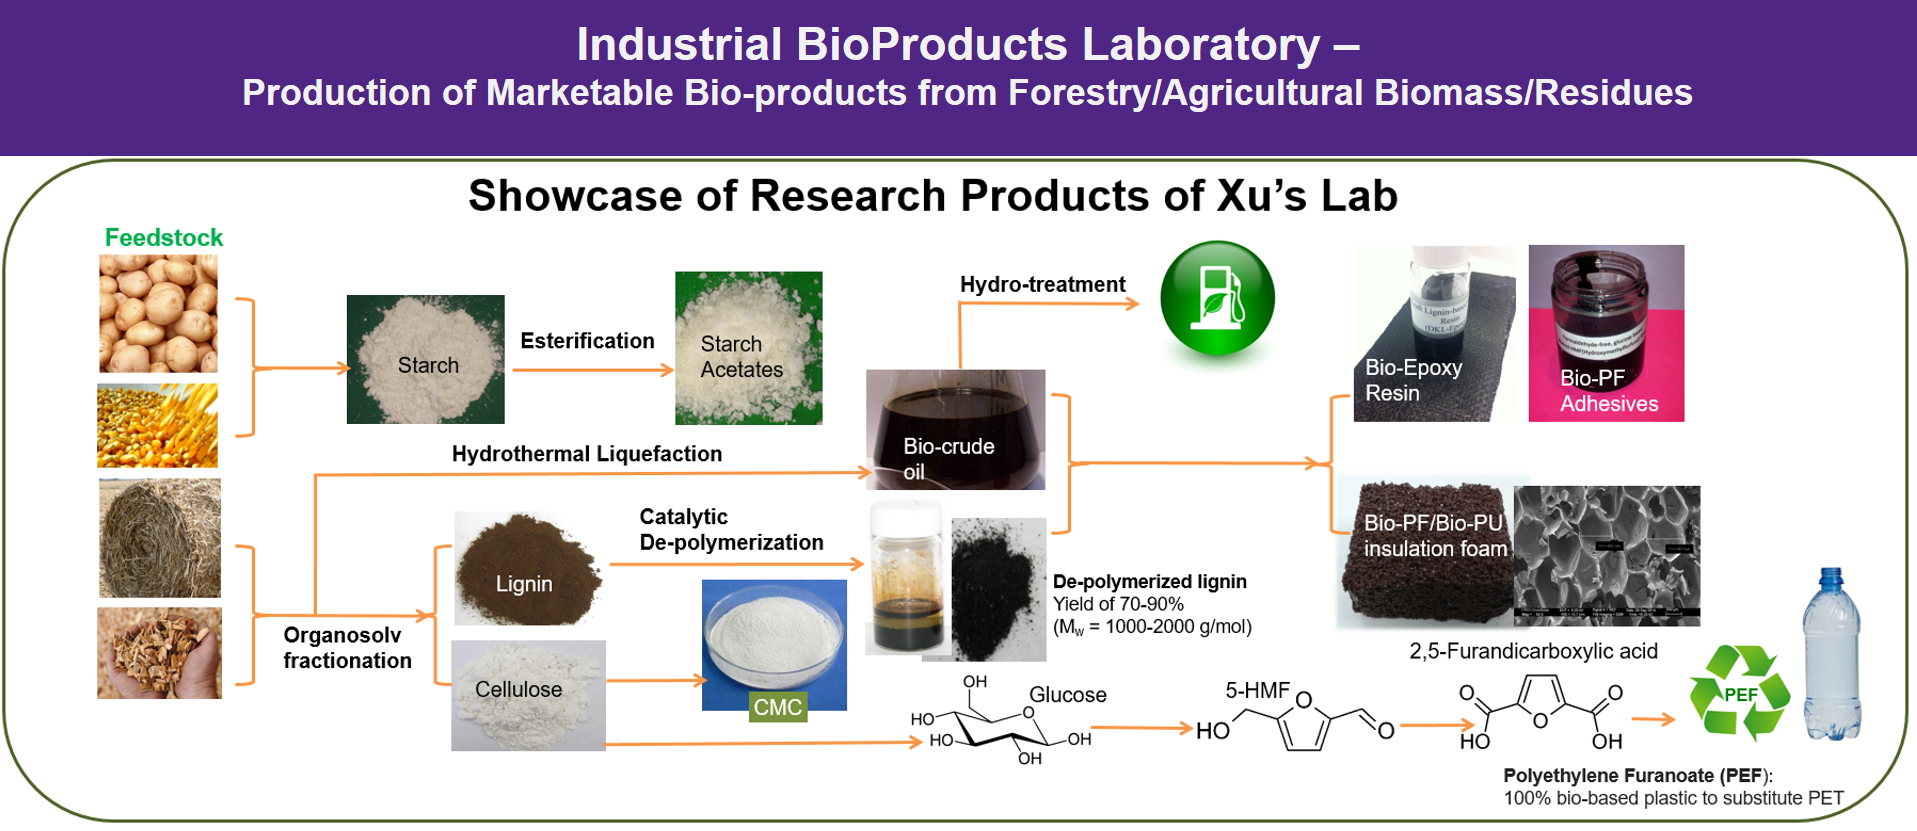 IBL-Lab-Research-Overview.png